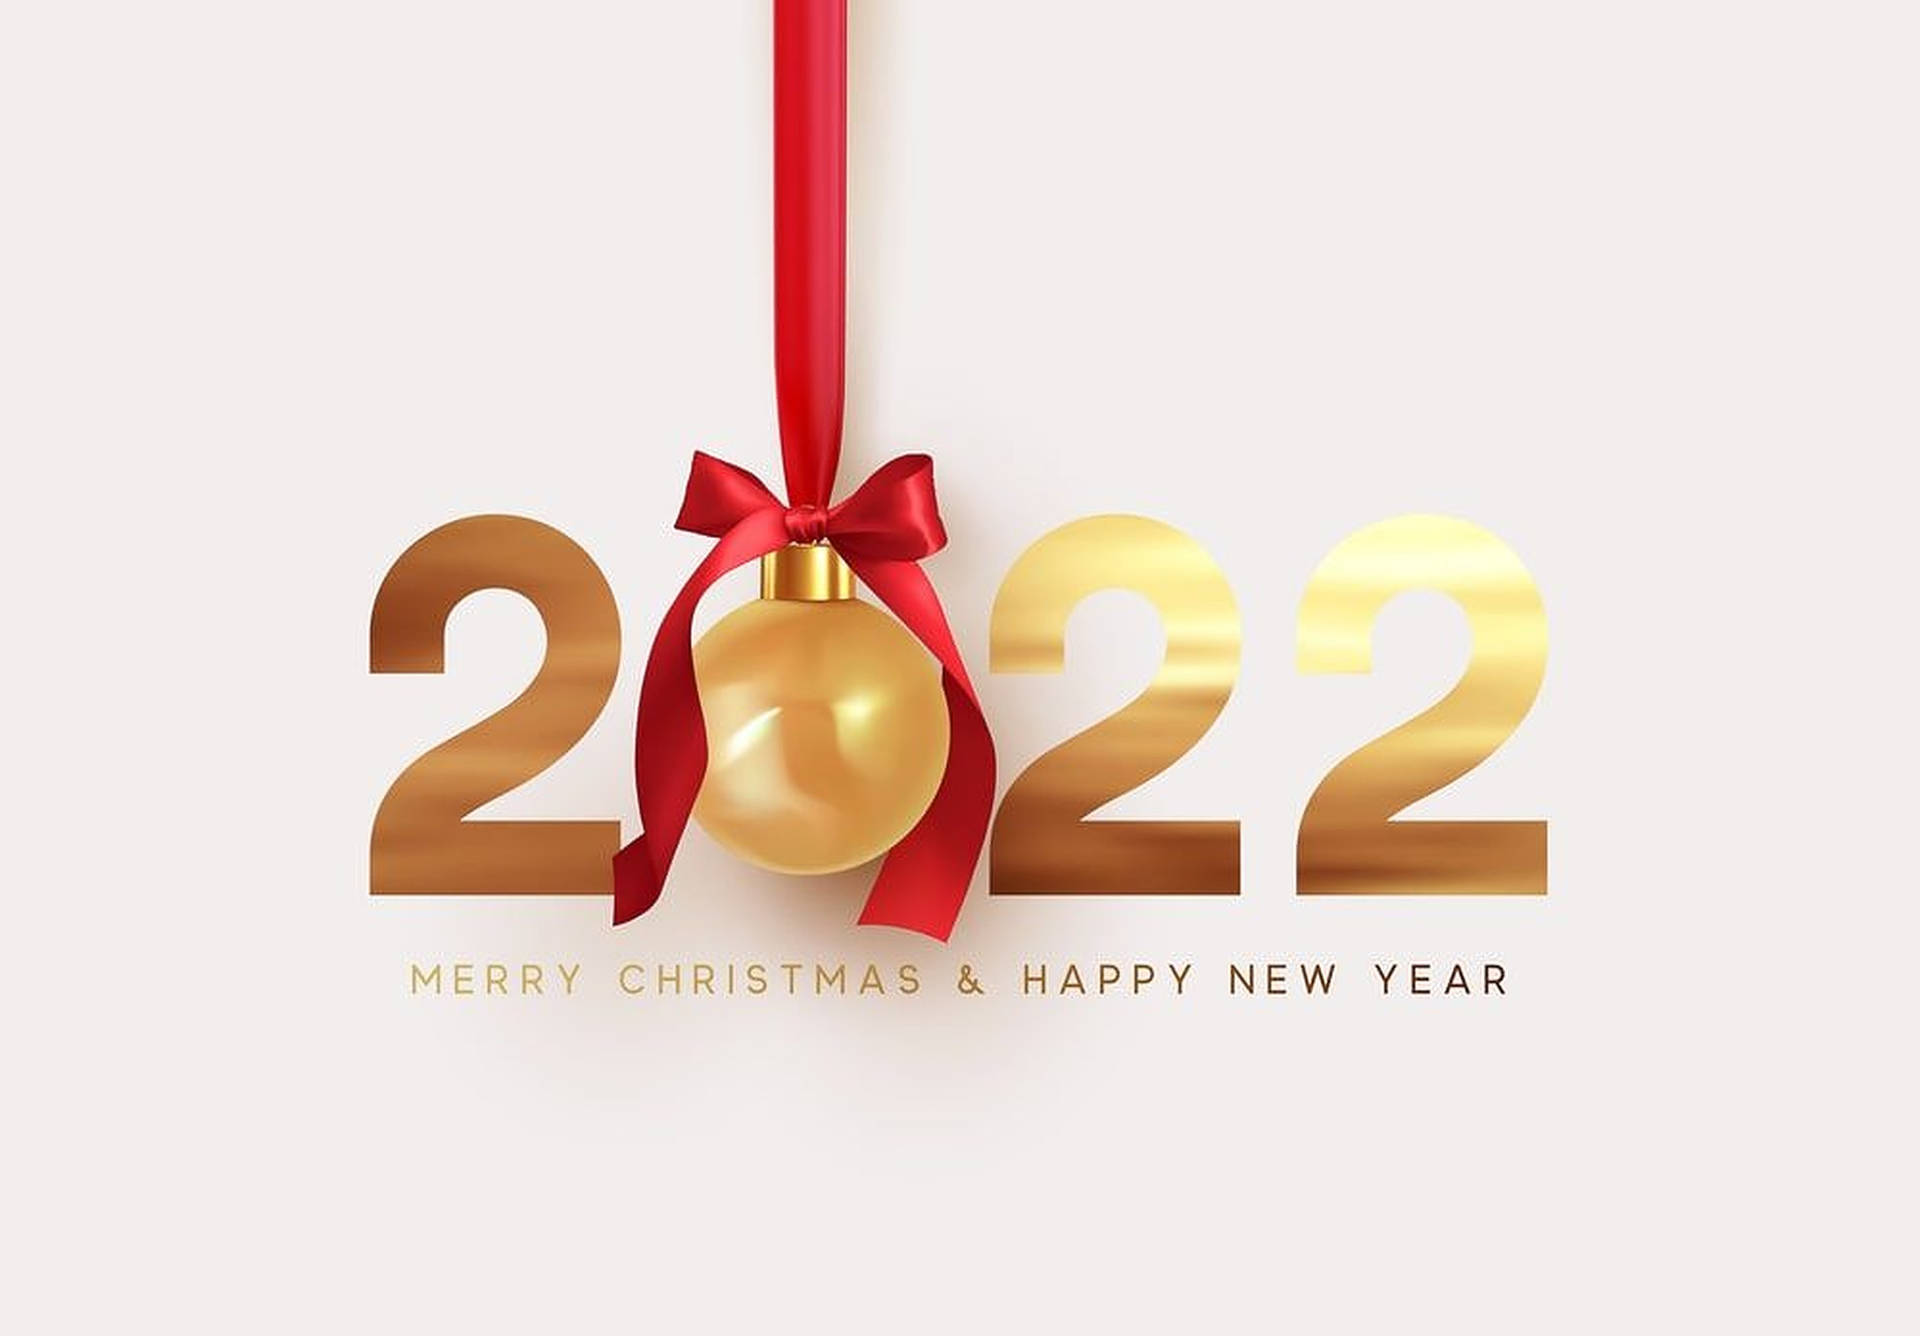 Merry Christmas And Happy New Year 2022